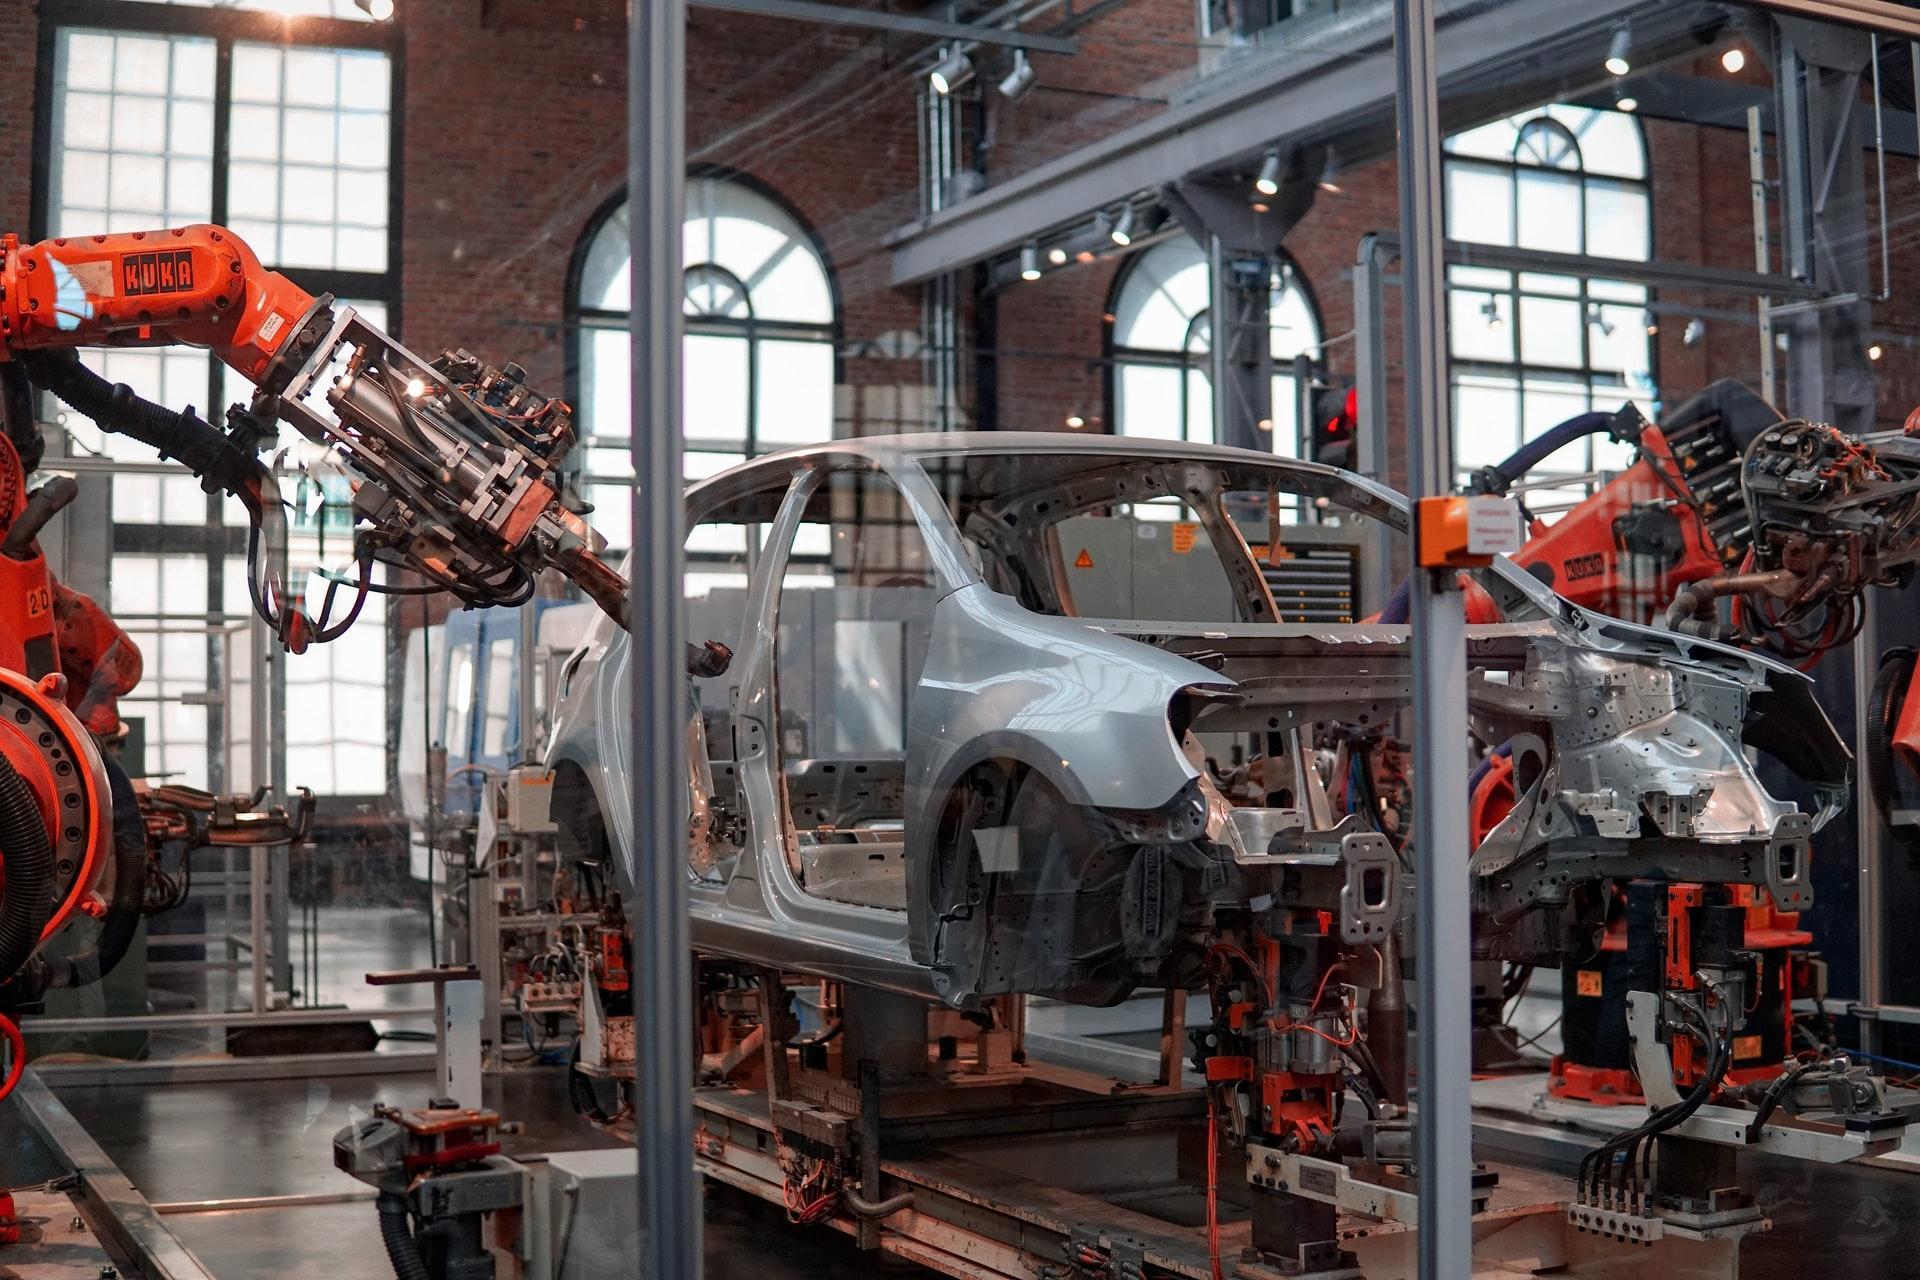 A new car being assembled in a factory.